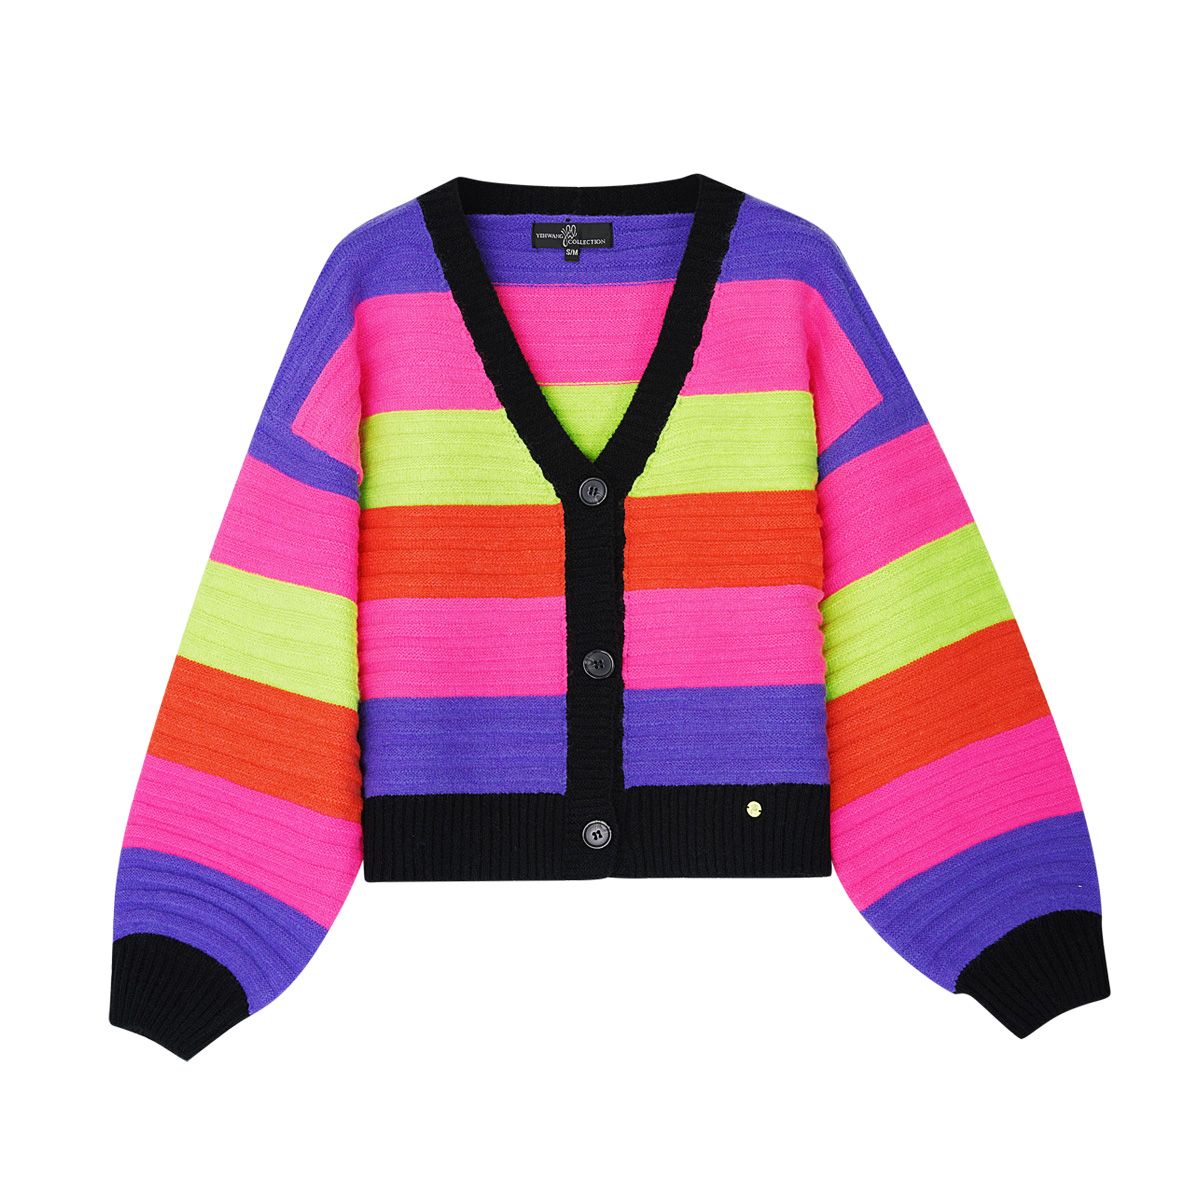 Cardigan with balloon sleeves - multi colors